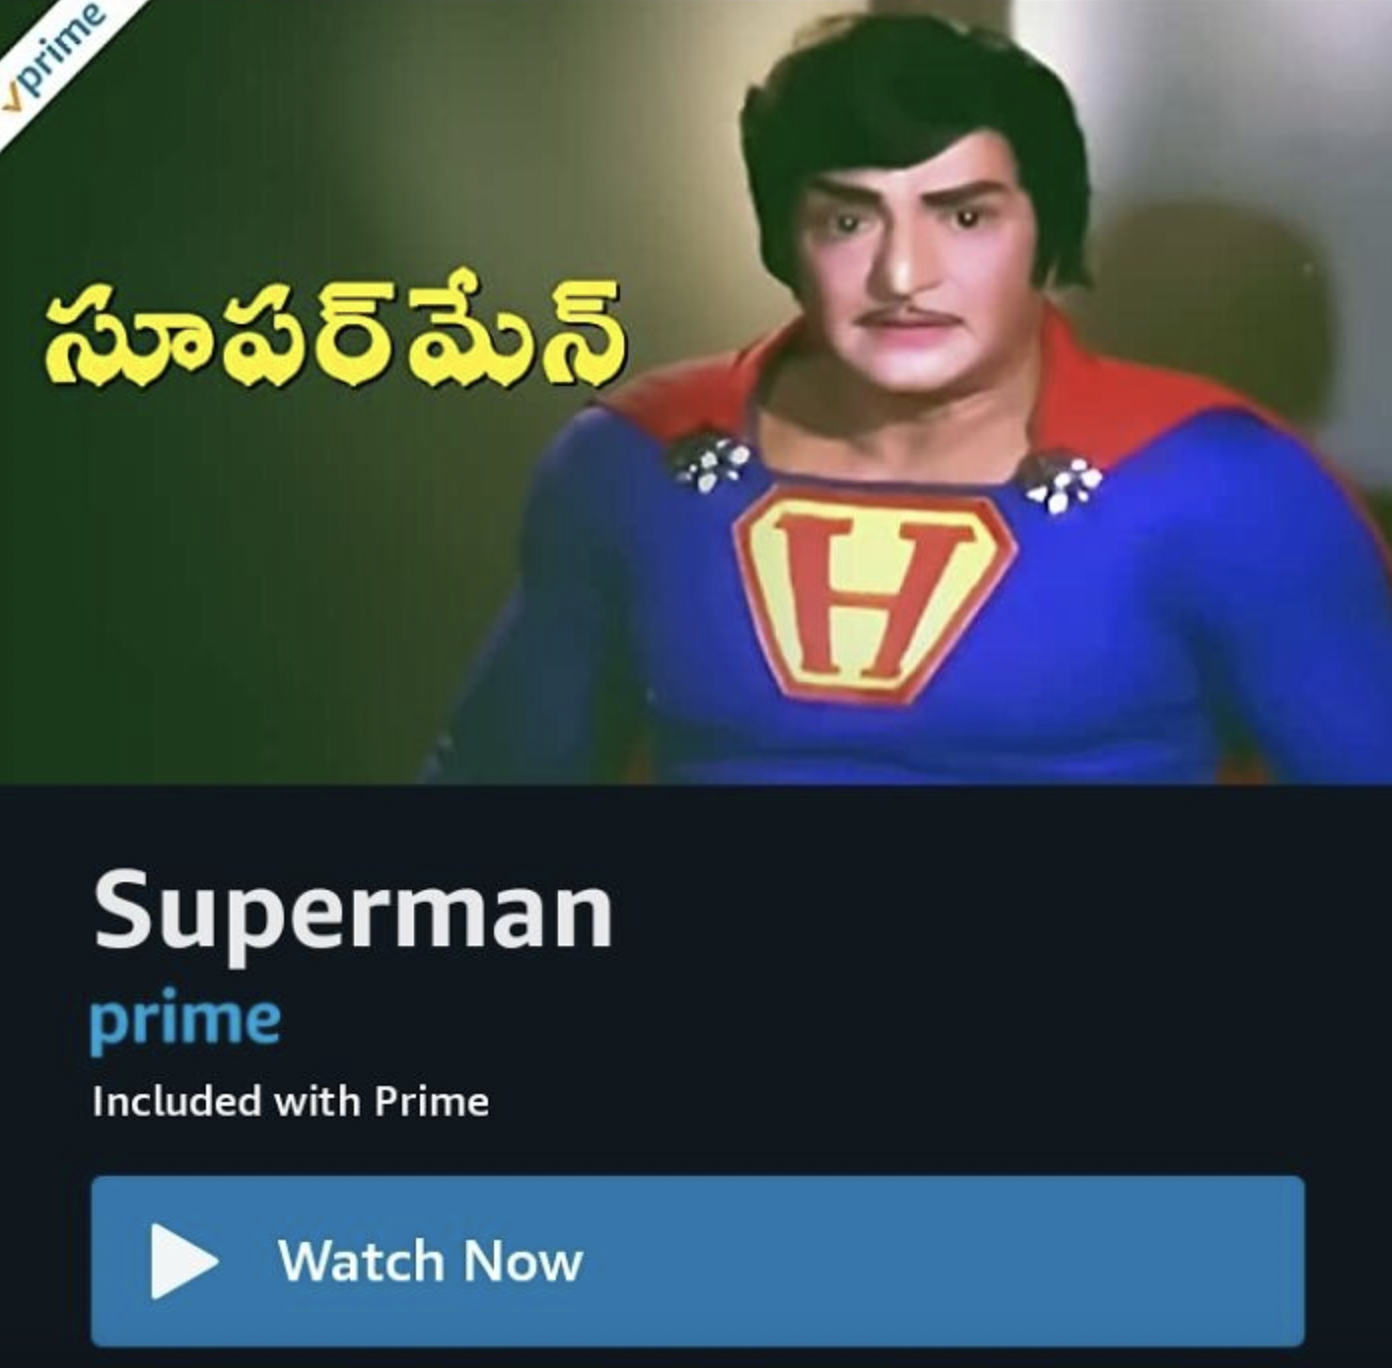 superman hindi - prime Superman prime Included with Prime Watch Now H